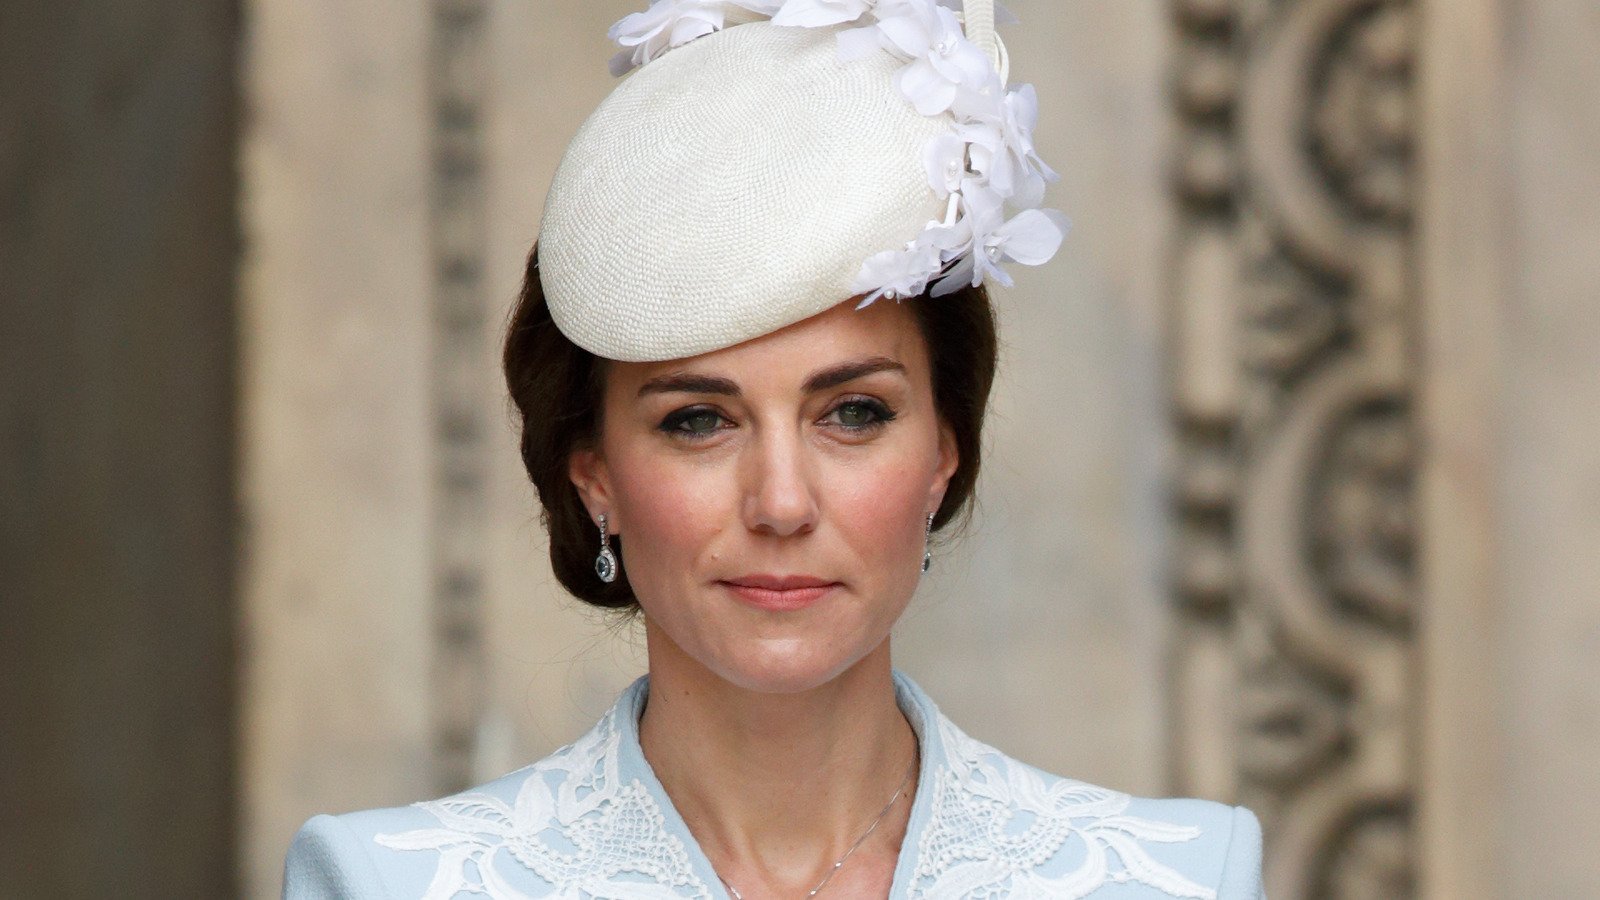 The Most Inappropriate Outfits Kate Middleton Has Worn - The List